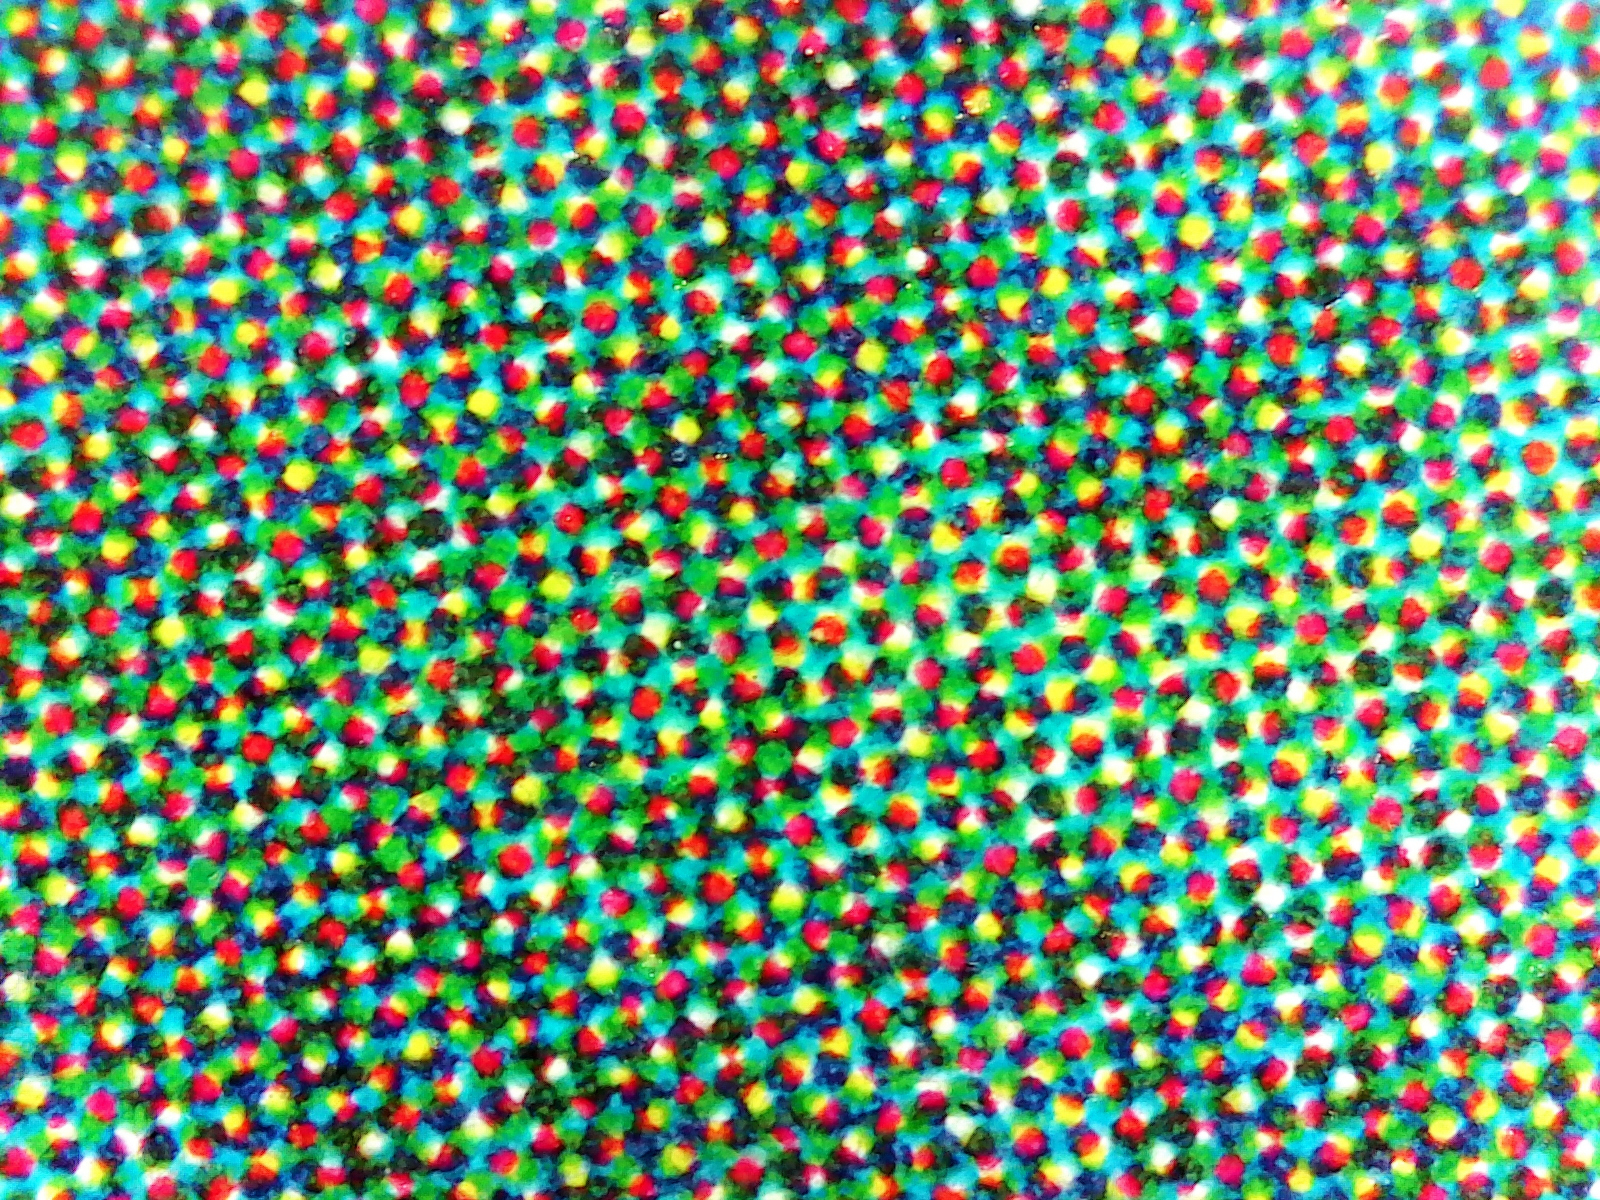 A CMYK print viewed under a microscope